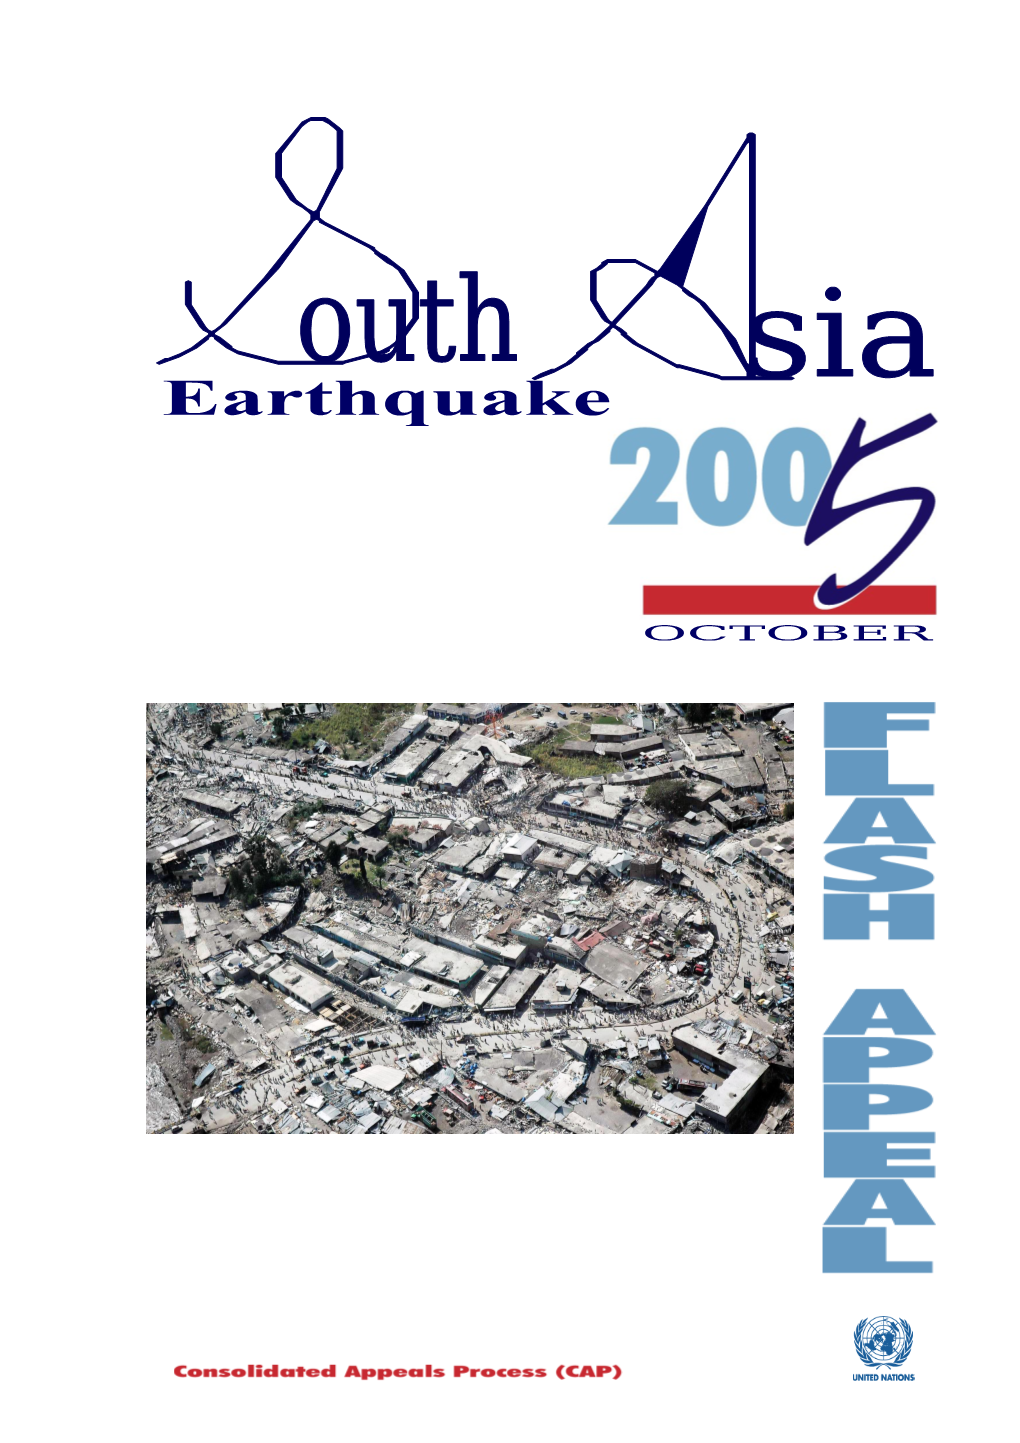 South Asia Flash Appeal 2005 - Earthquake (Word)